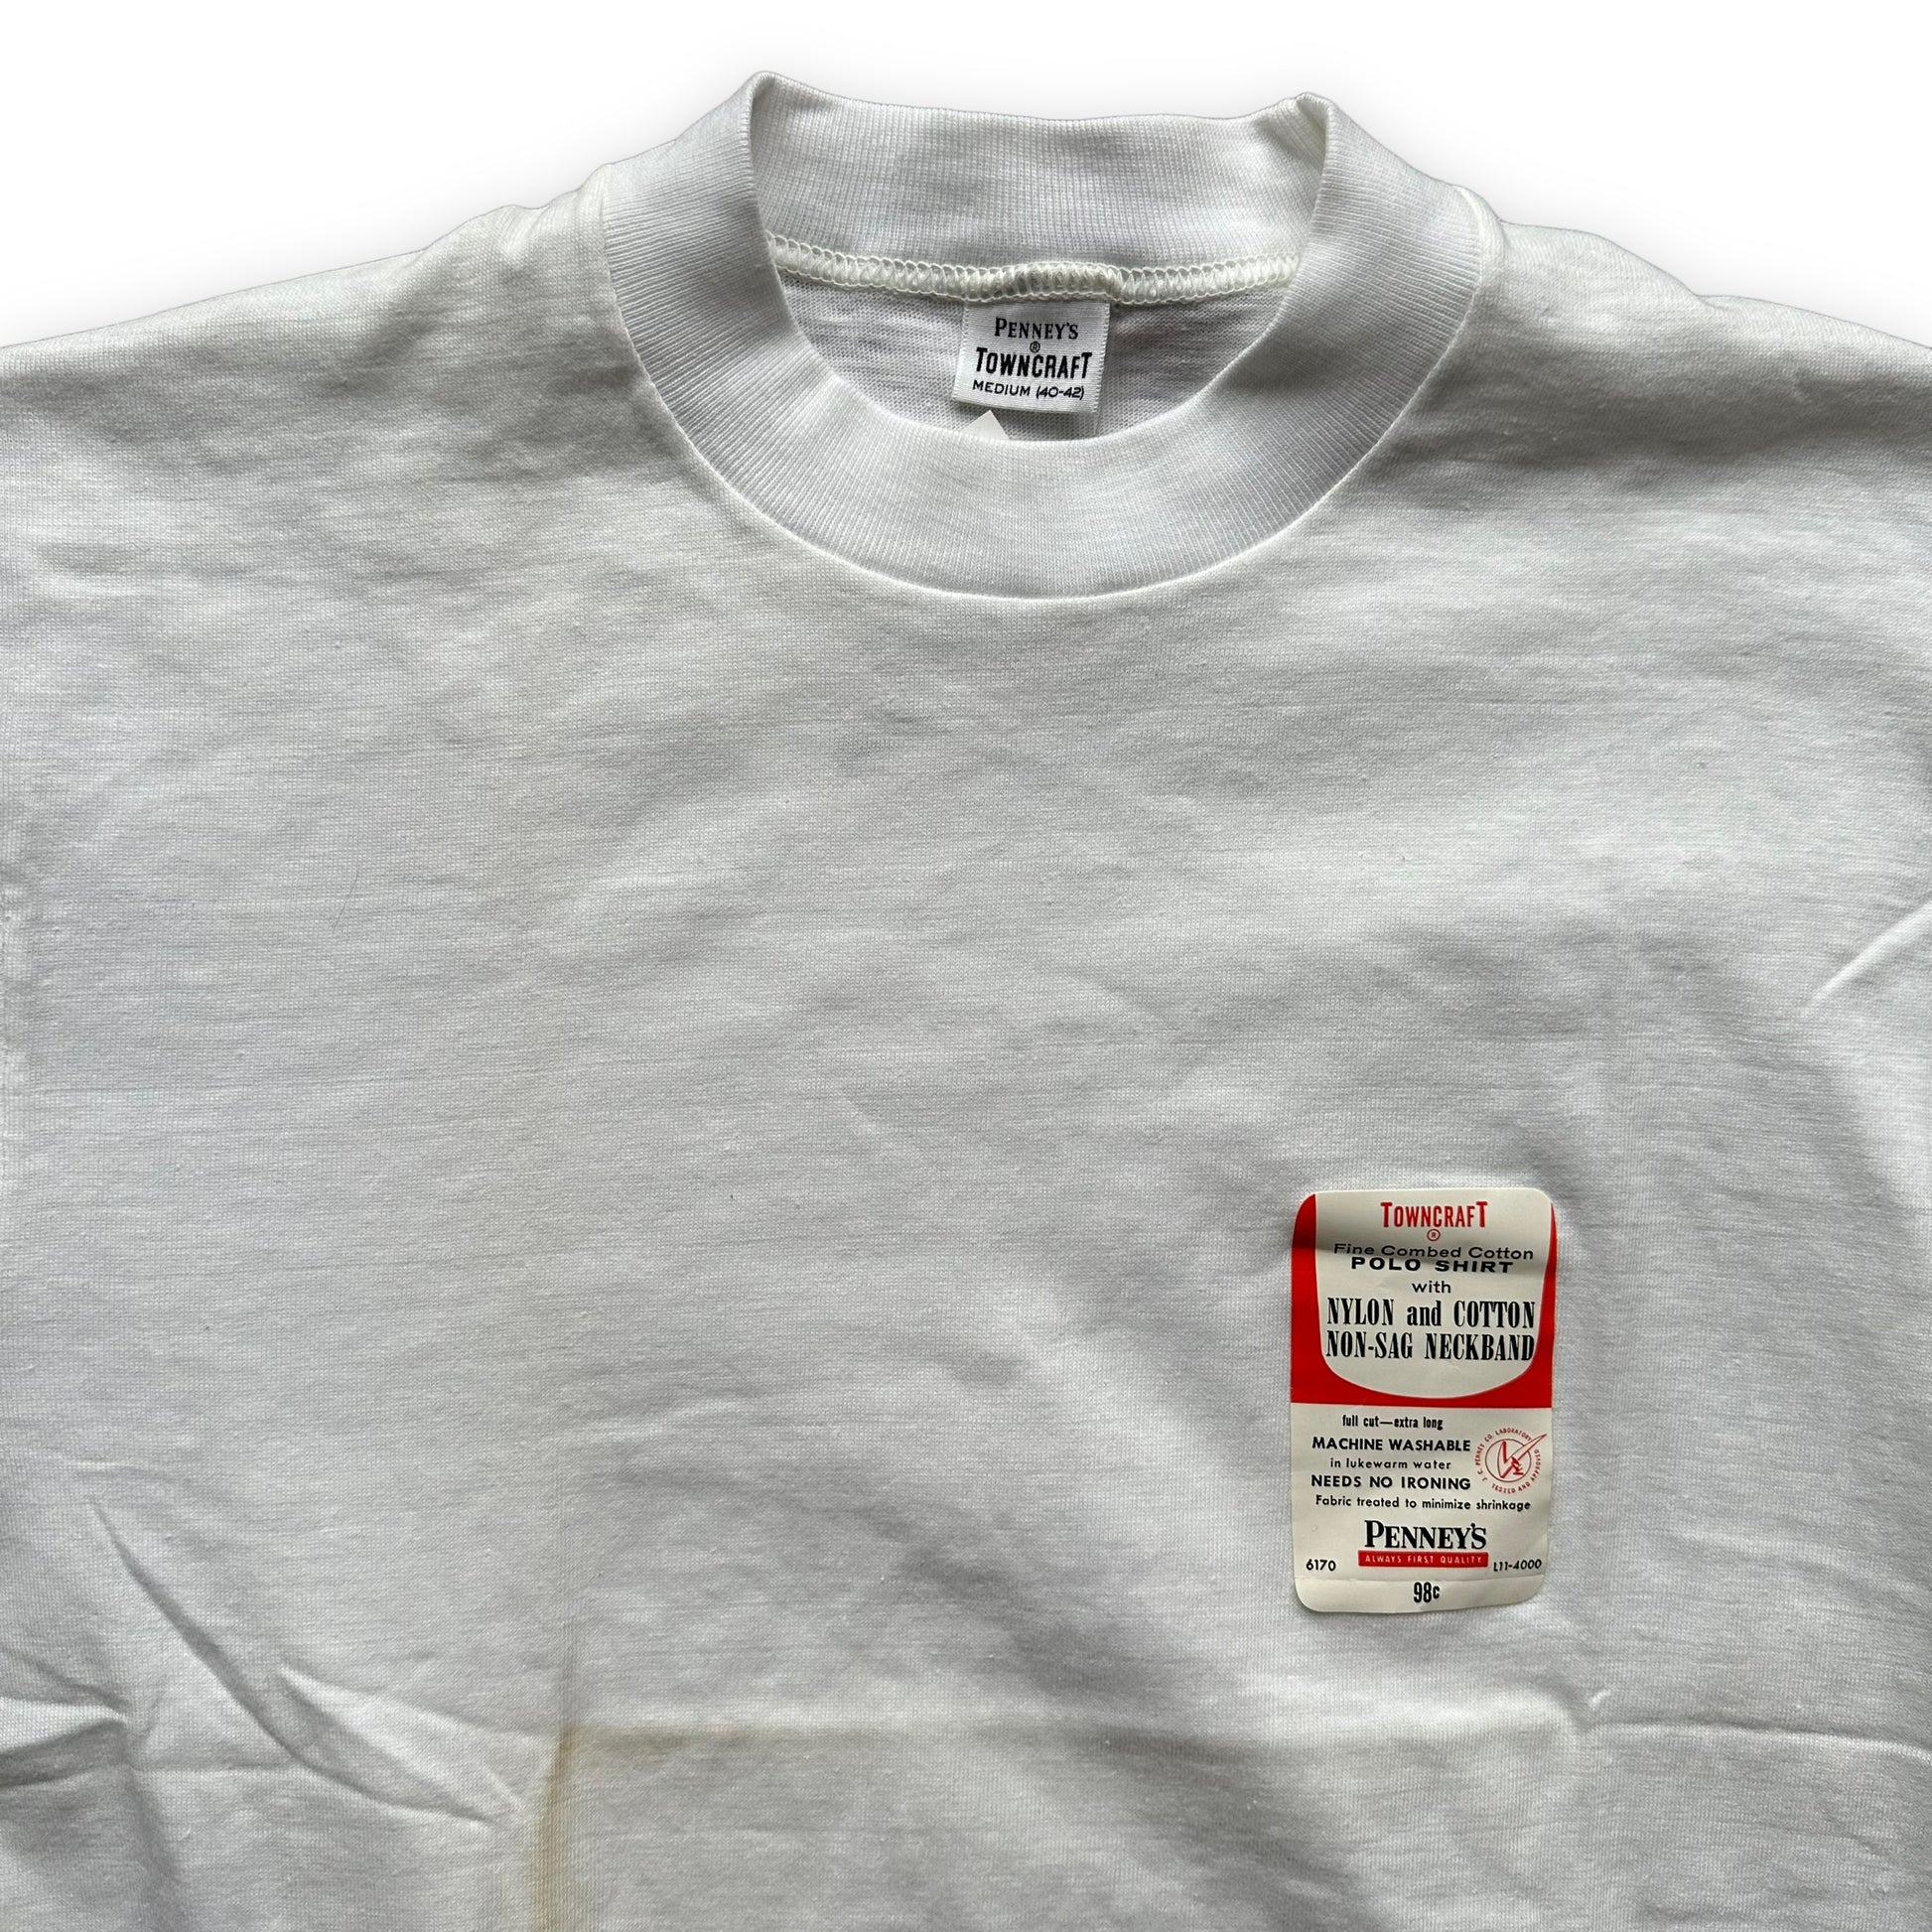 Upper Front View of Vintage NWT Penneys Towncraft Tee Shirt SZ M | Vintage Blank Tees Seattle | Vintage T-Shirts Seattle